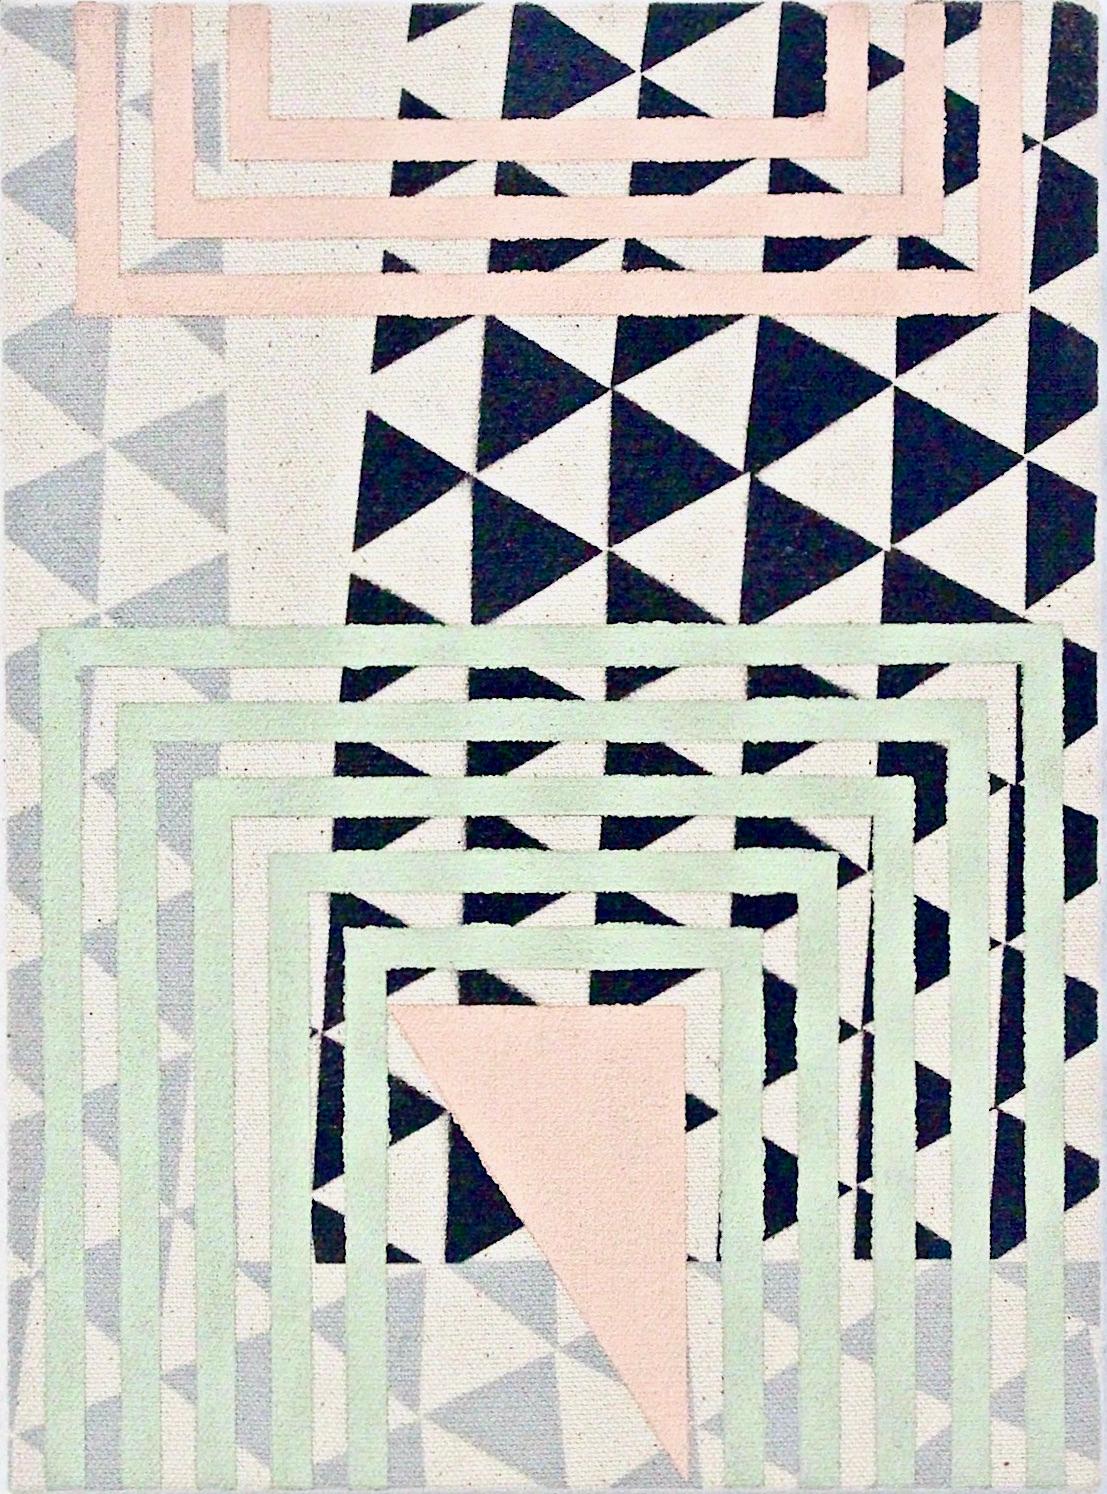 ALLOW - Abstract Geometric, Pink, Mint, Grey Painting on Canvas 